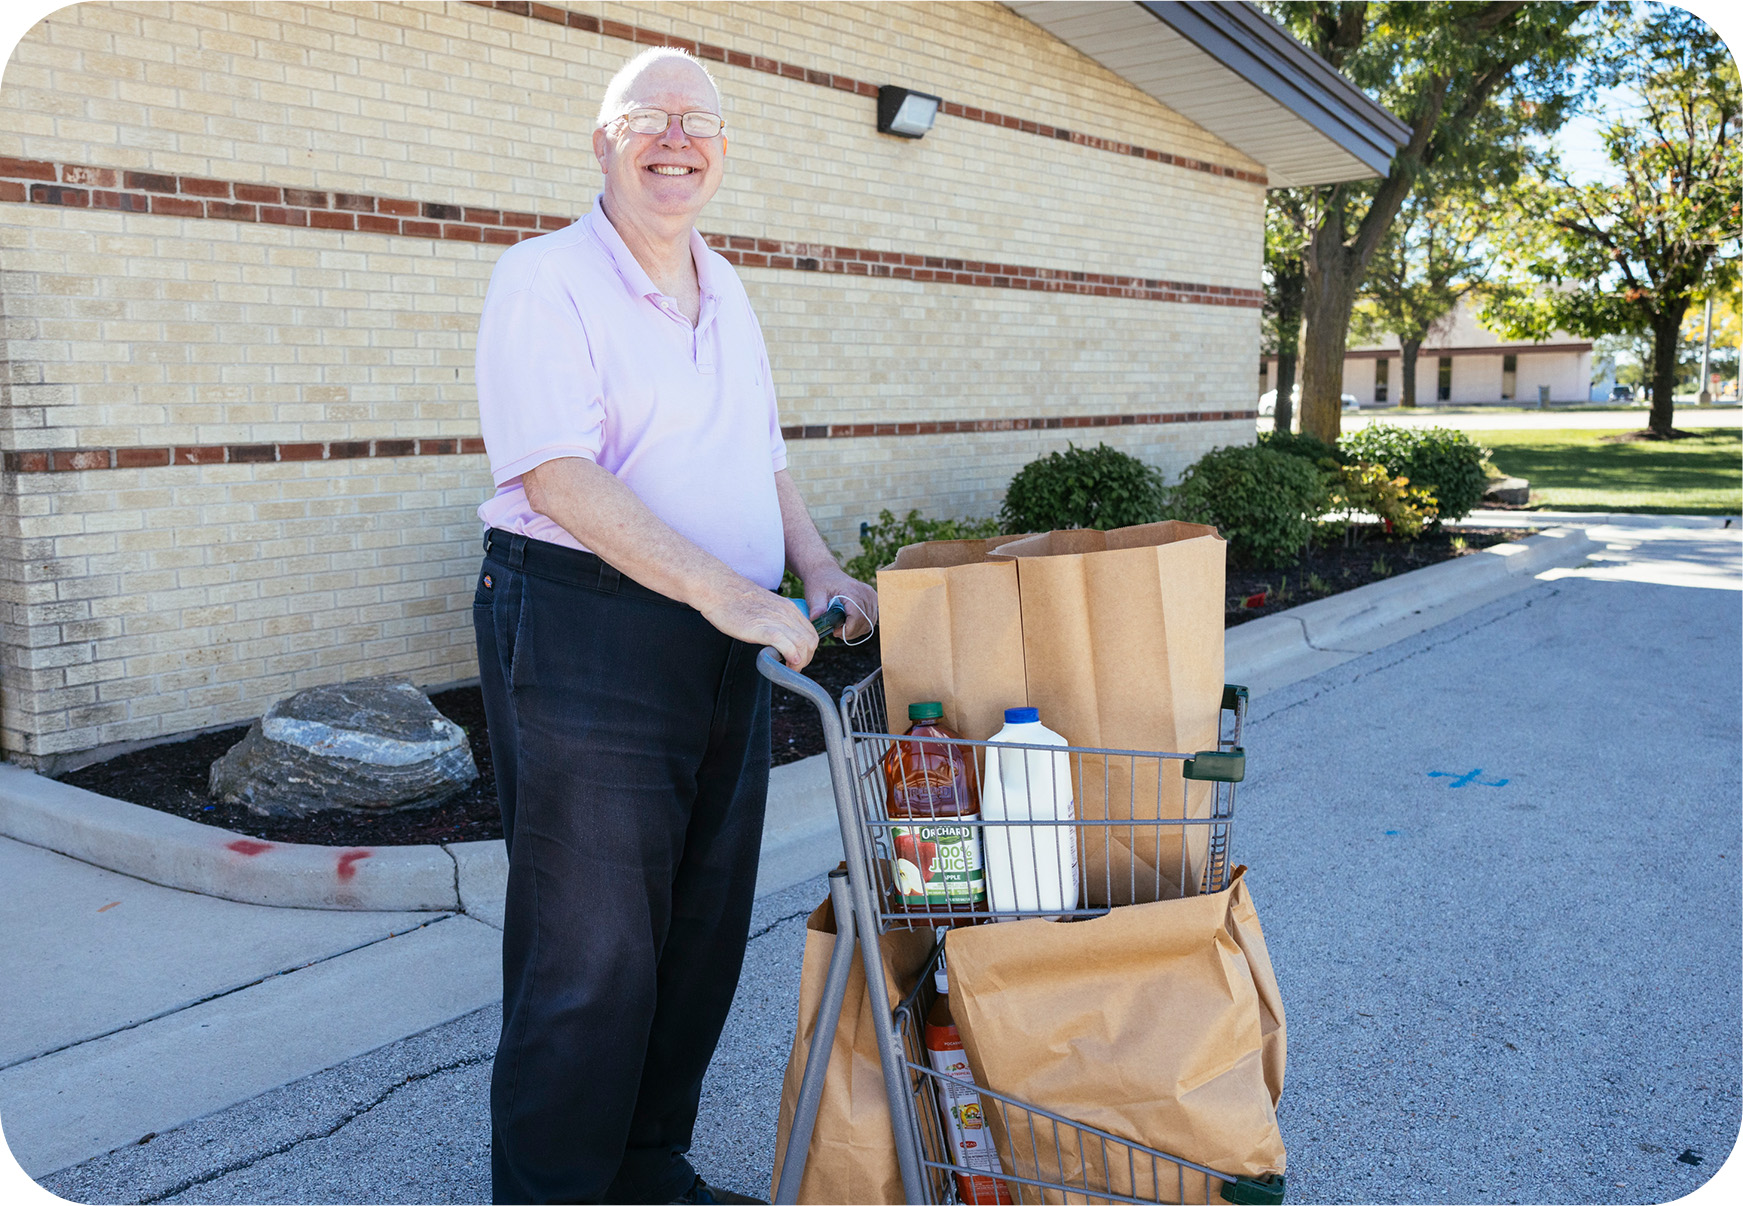 An older adult who just received groceries from a local food pantry.